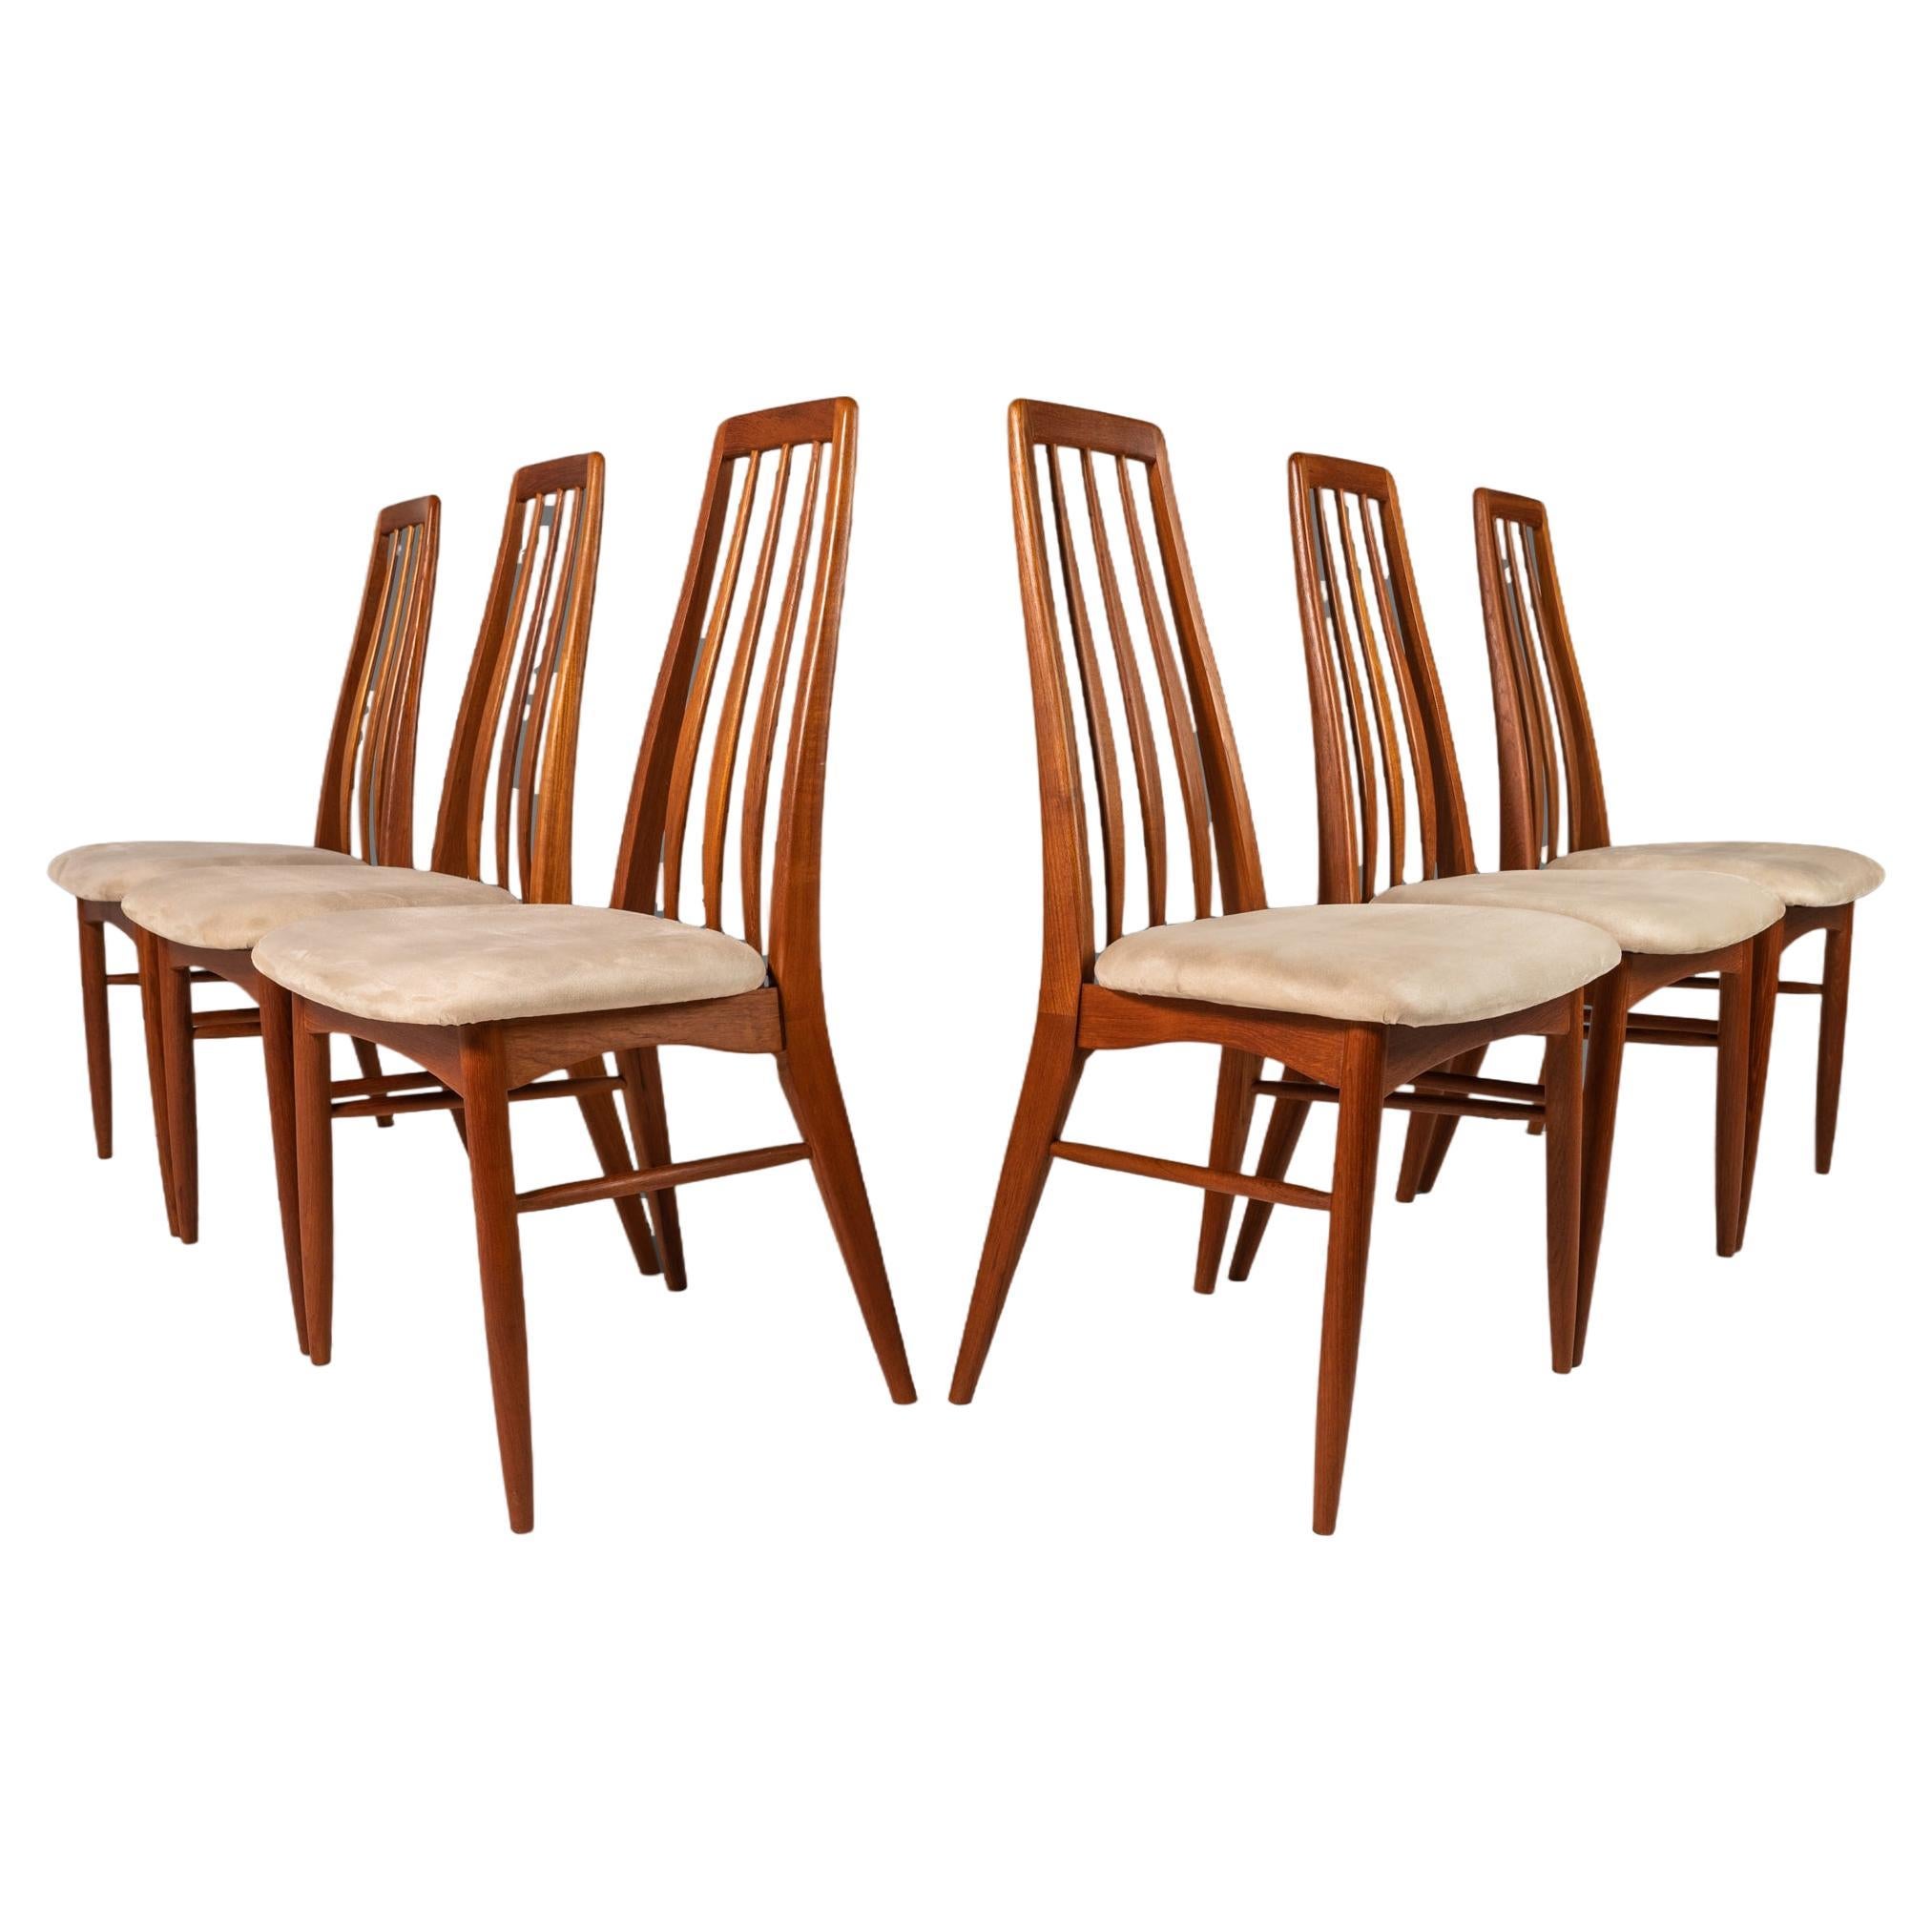 Set of Six (6) Teak Eva Dining Chairs by Niels Koefoed for Koefoeds Hornslet 60s For Sale